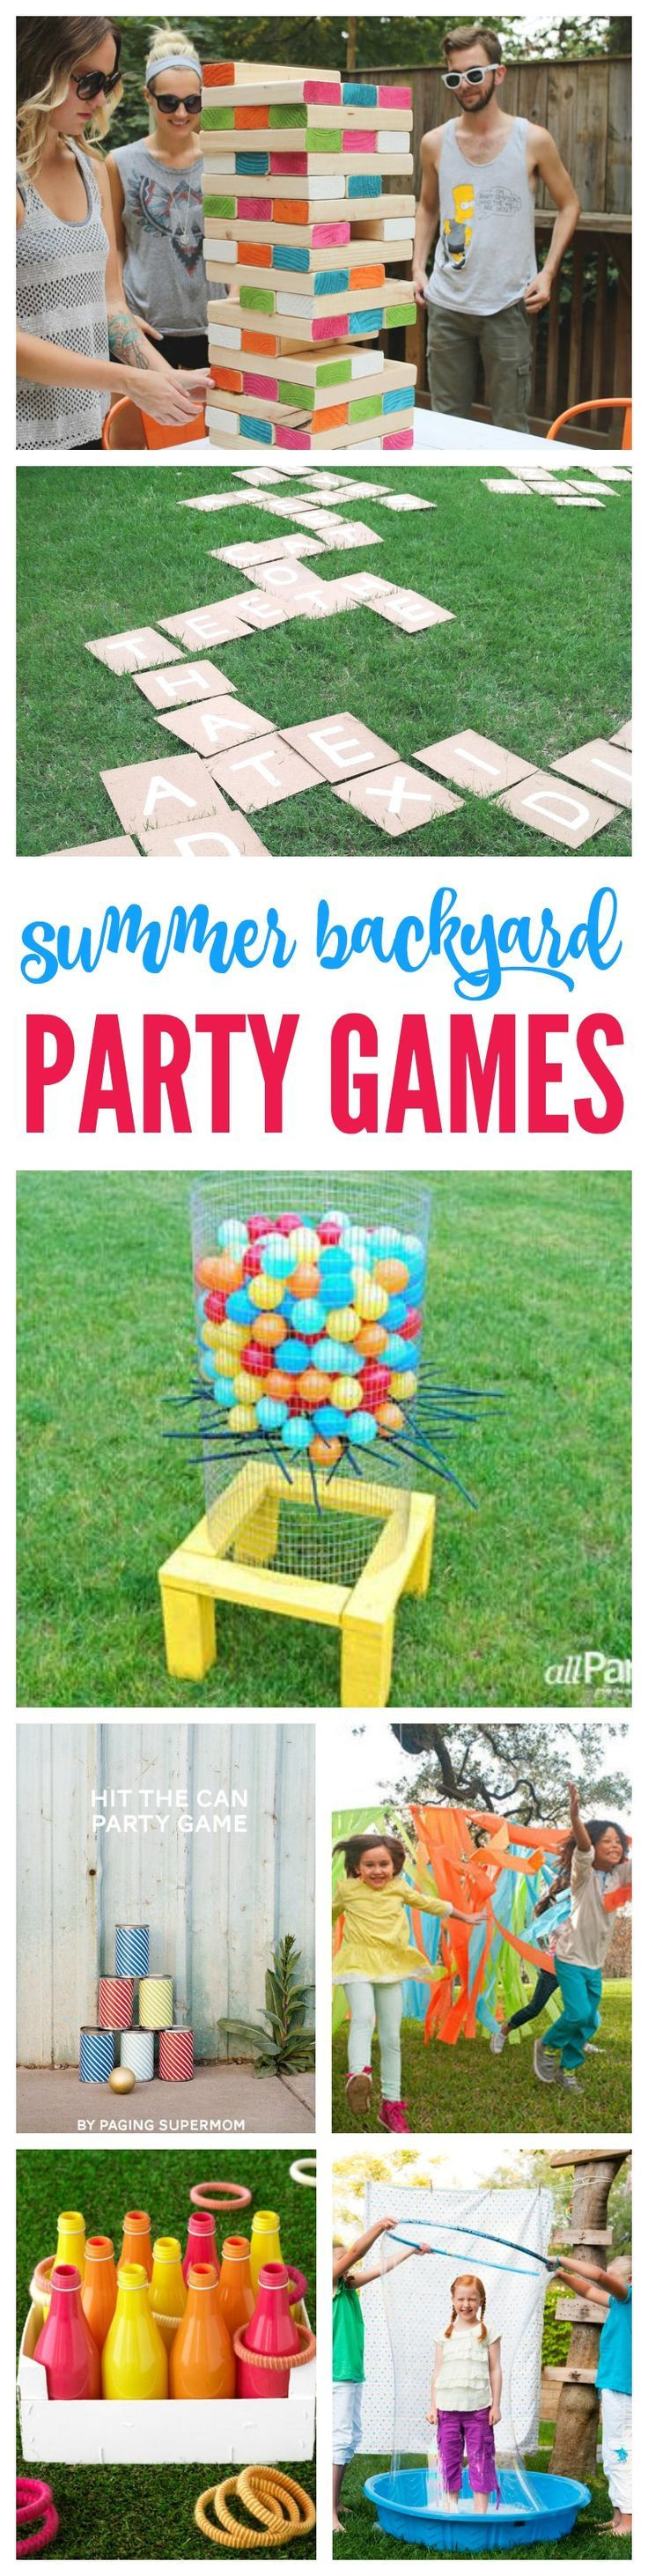 Beach Party Games For Adults Ideas
 25 best ideas about Beach party games on Pinterest